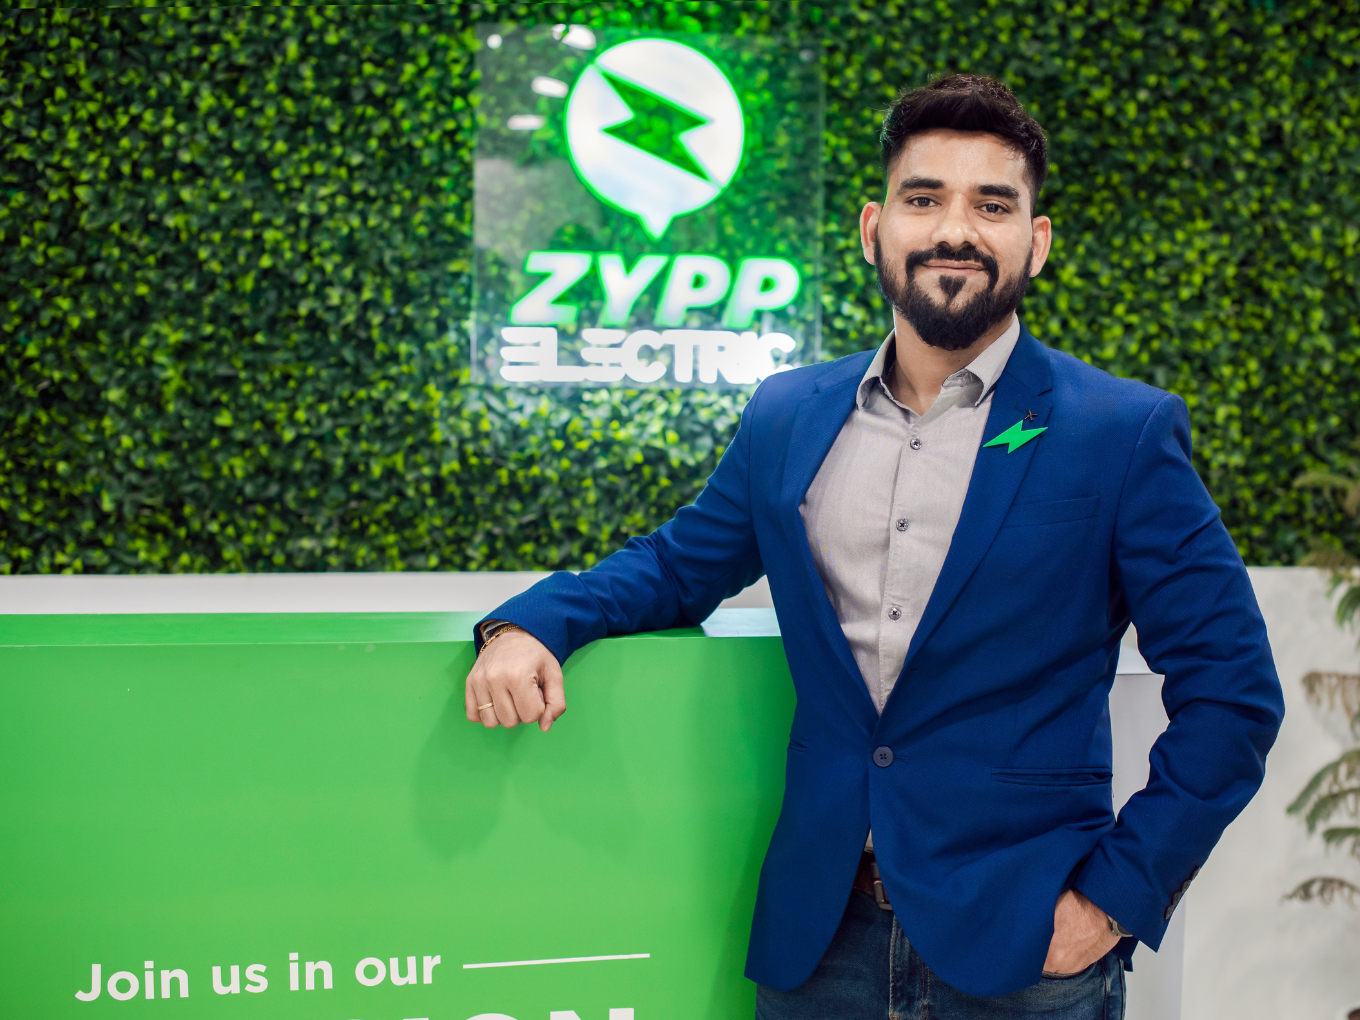 Zypp Electric Raises $25 Mn In A Mix Of Equity & Debt To Widen Footprint, Fleet Expansion - Inc42 (Picture 1)